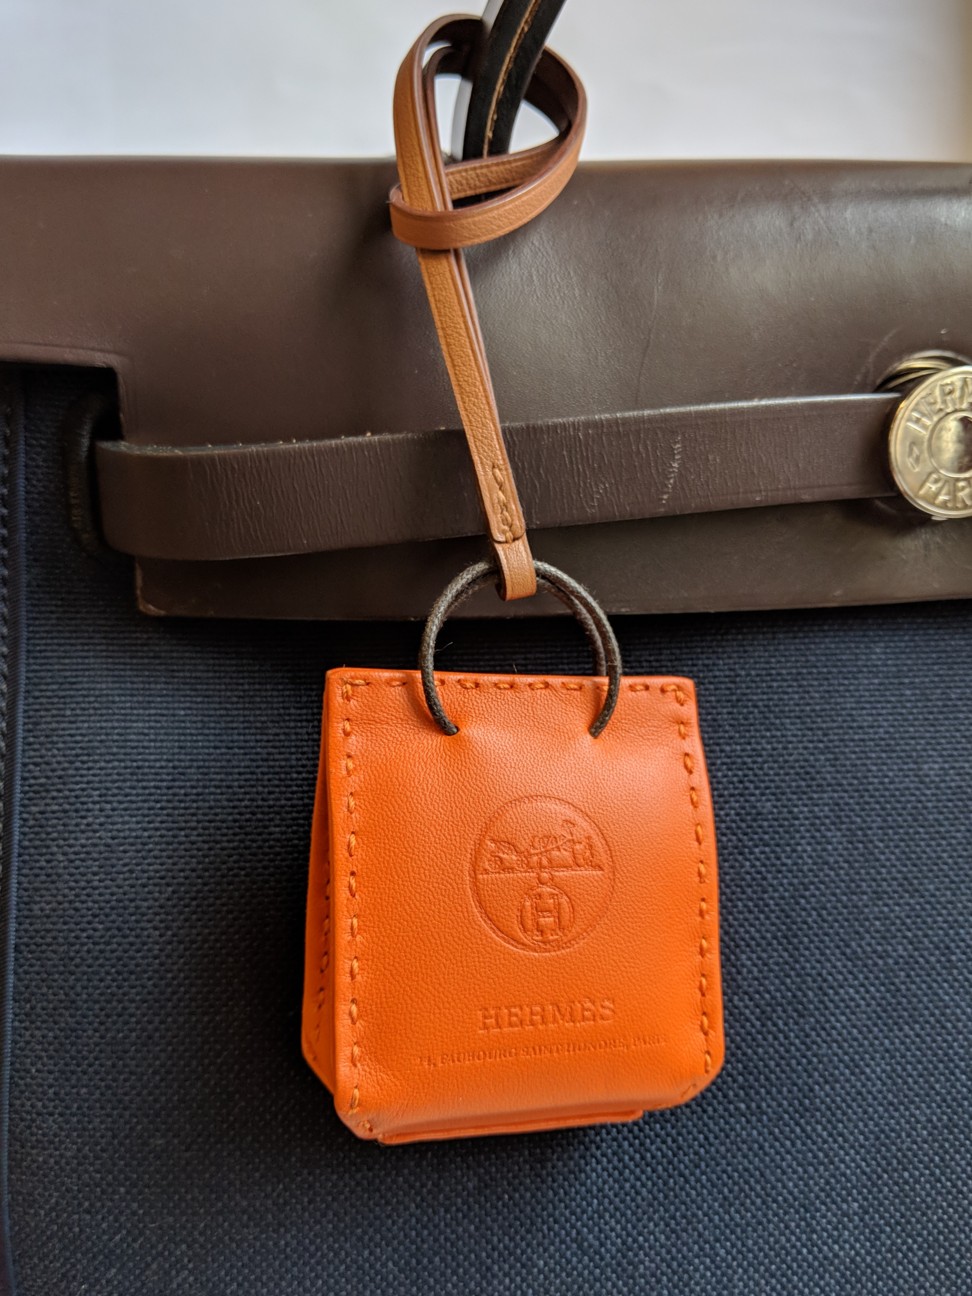 Hermes Kelly Twilly - 18 For Sale on 1stDibs